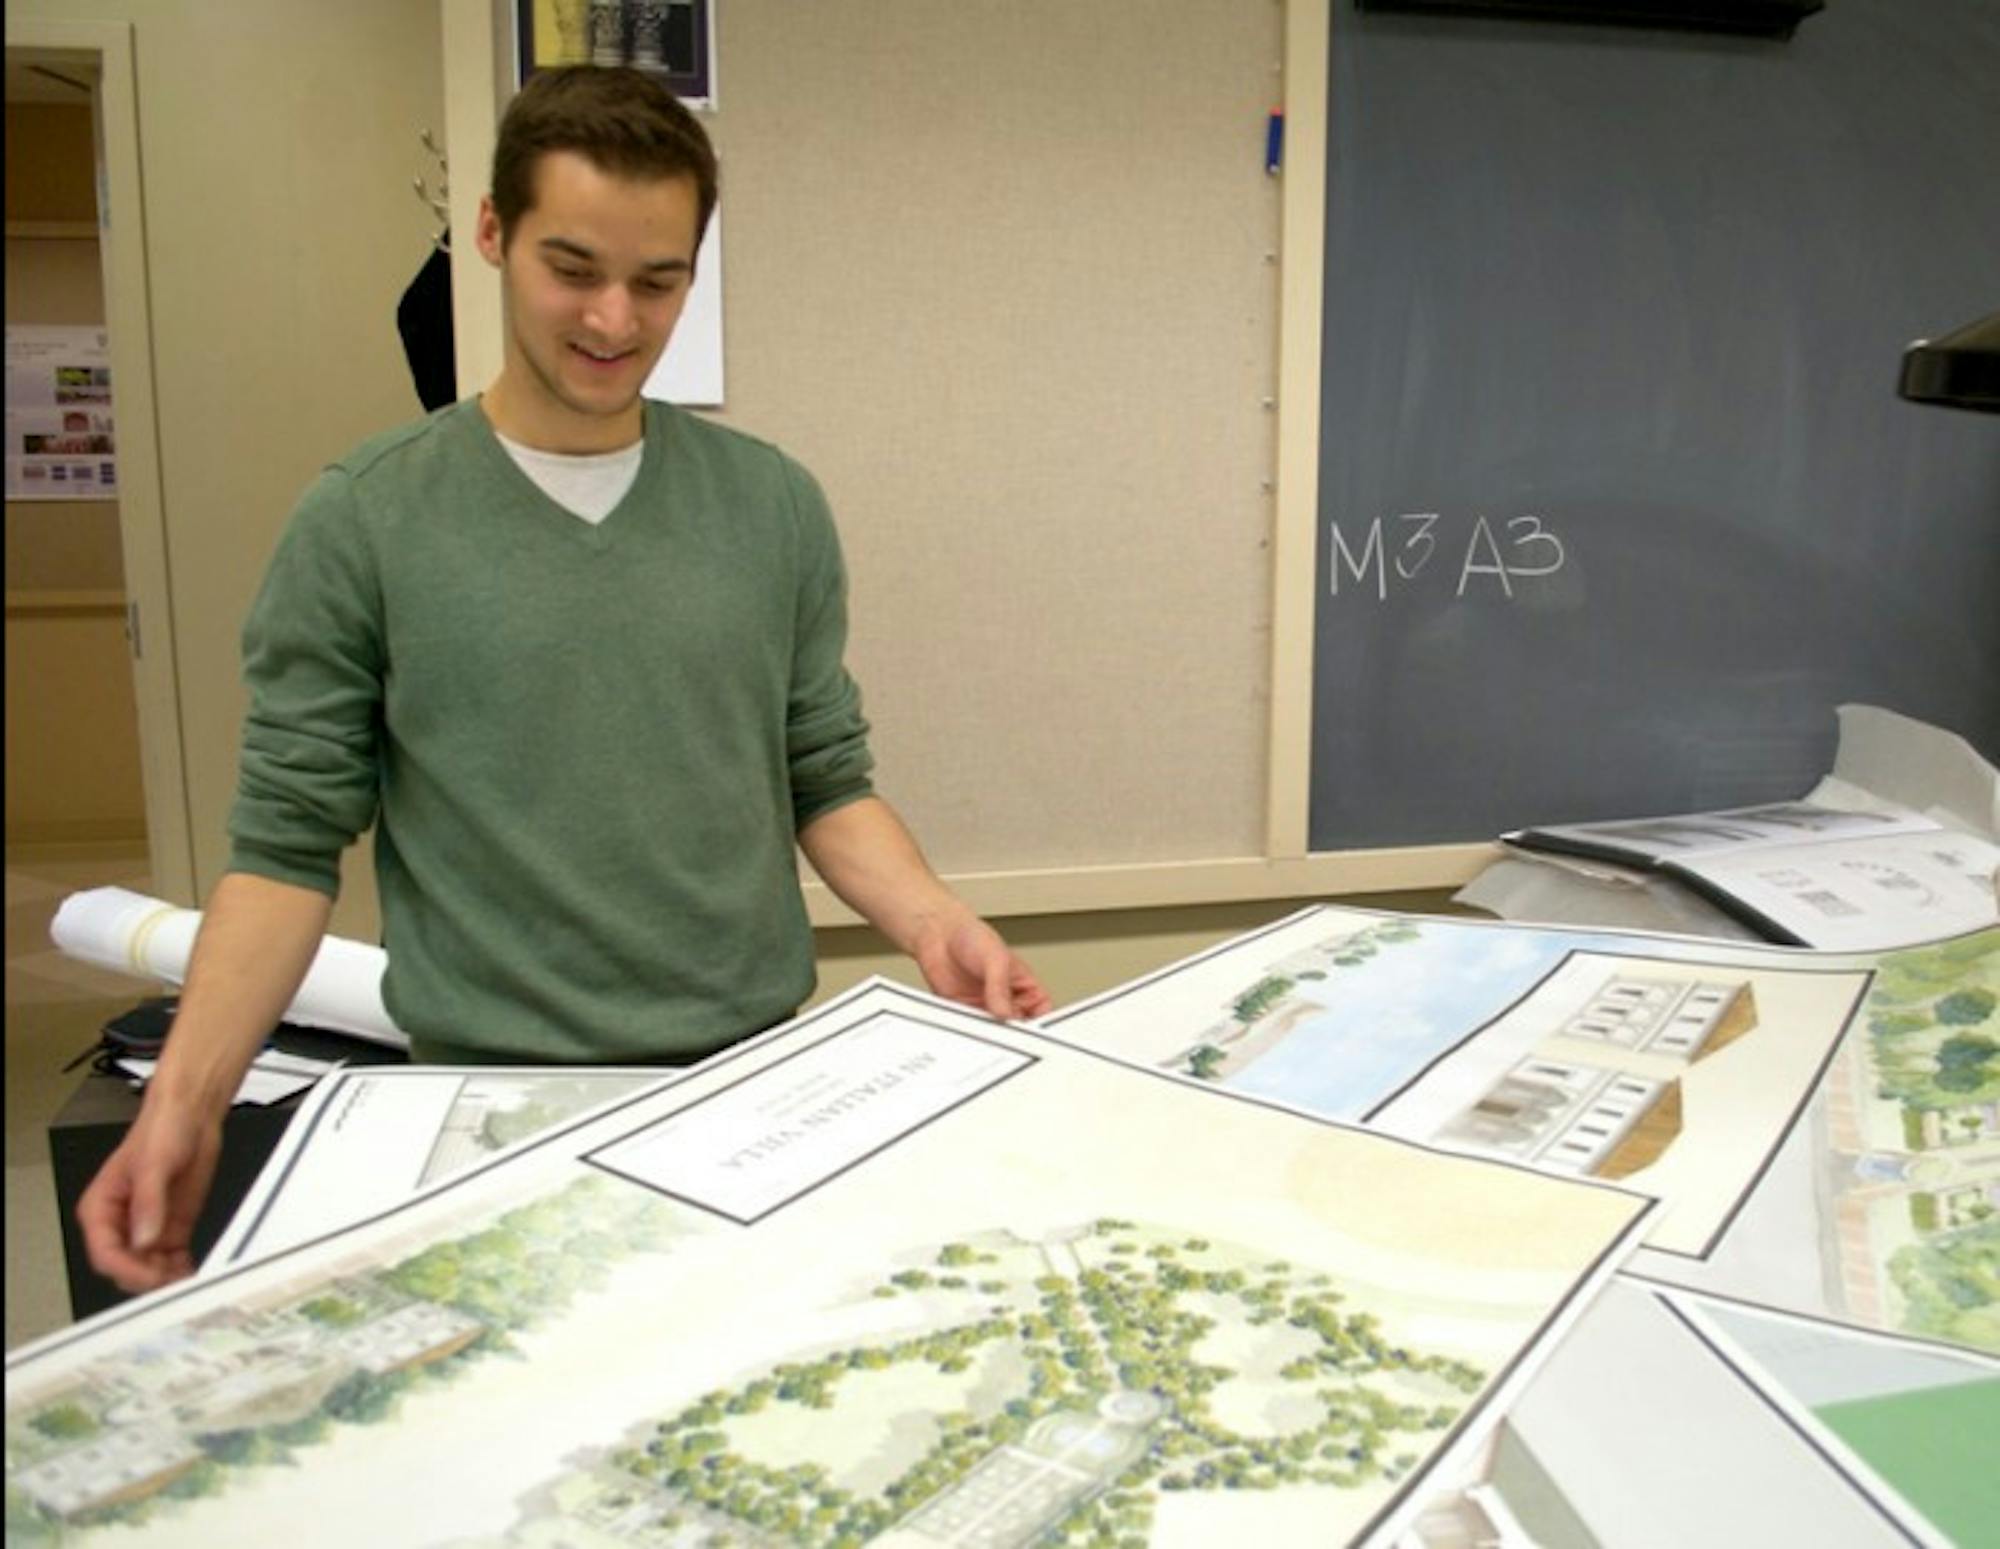 Fifth-year architecture student Mark Santrach reviews reprints of watercolors he created for class projects while studying abroad in Rome. Santrach earned a 3.993 cumulative grade point average at Notre Dame.